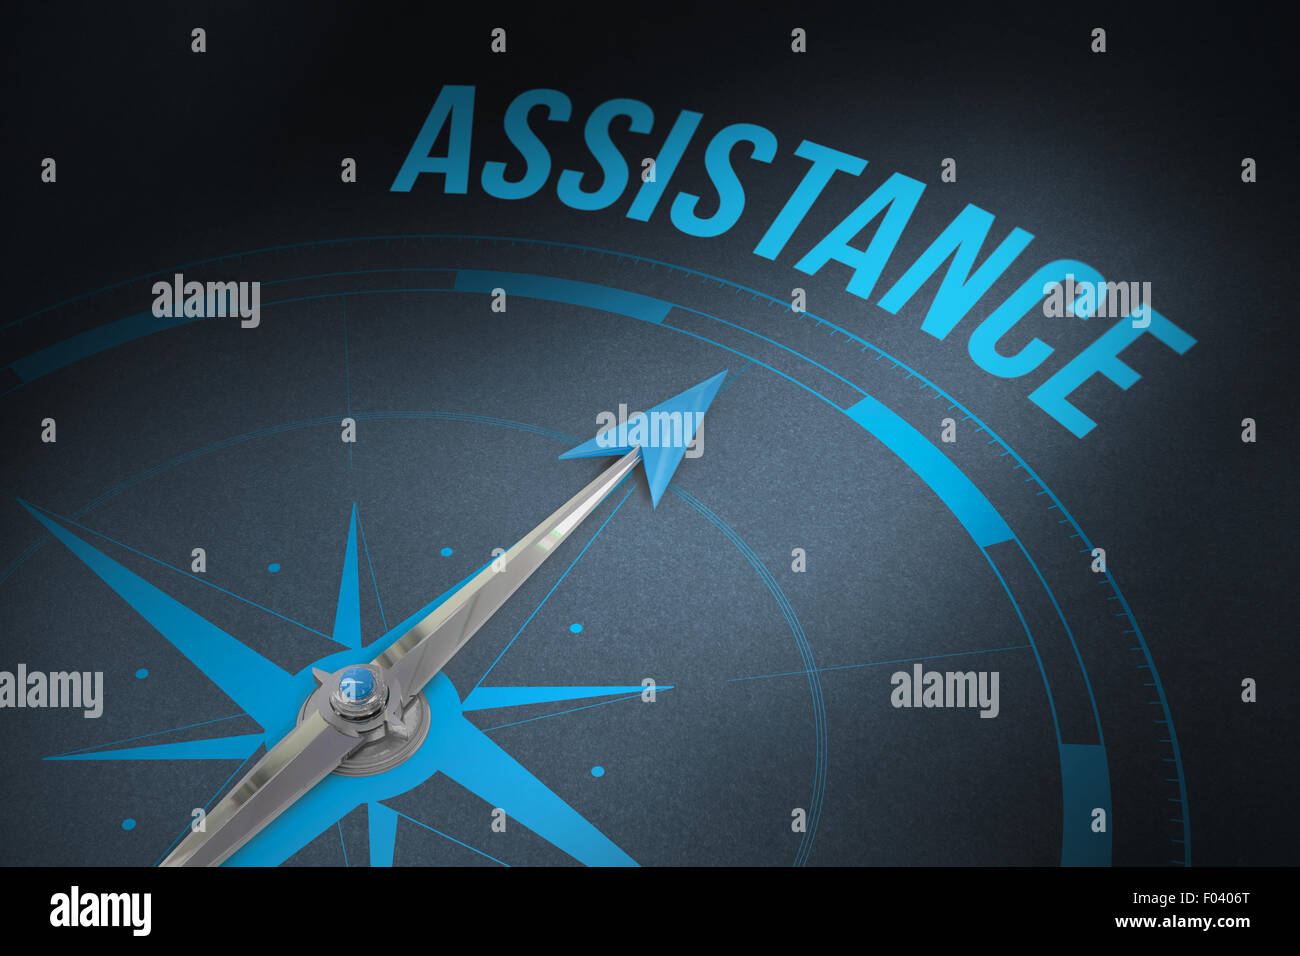 Assistance  against grey background Stock Photo